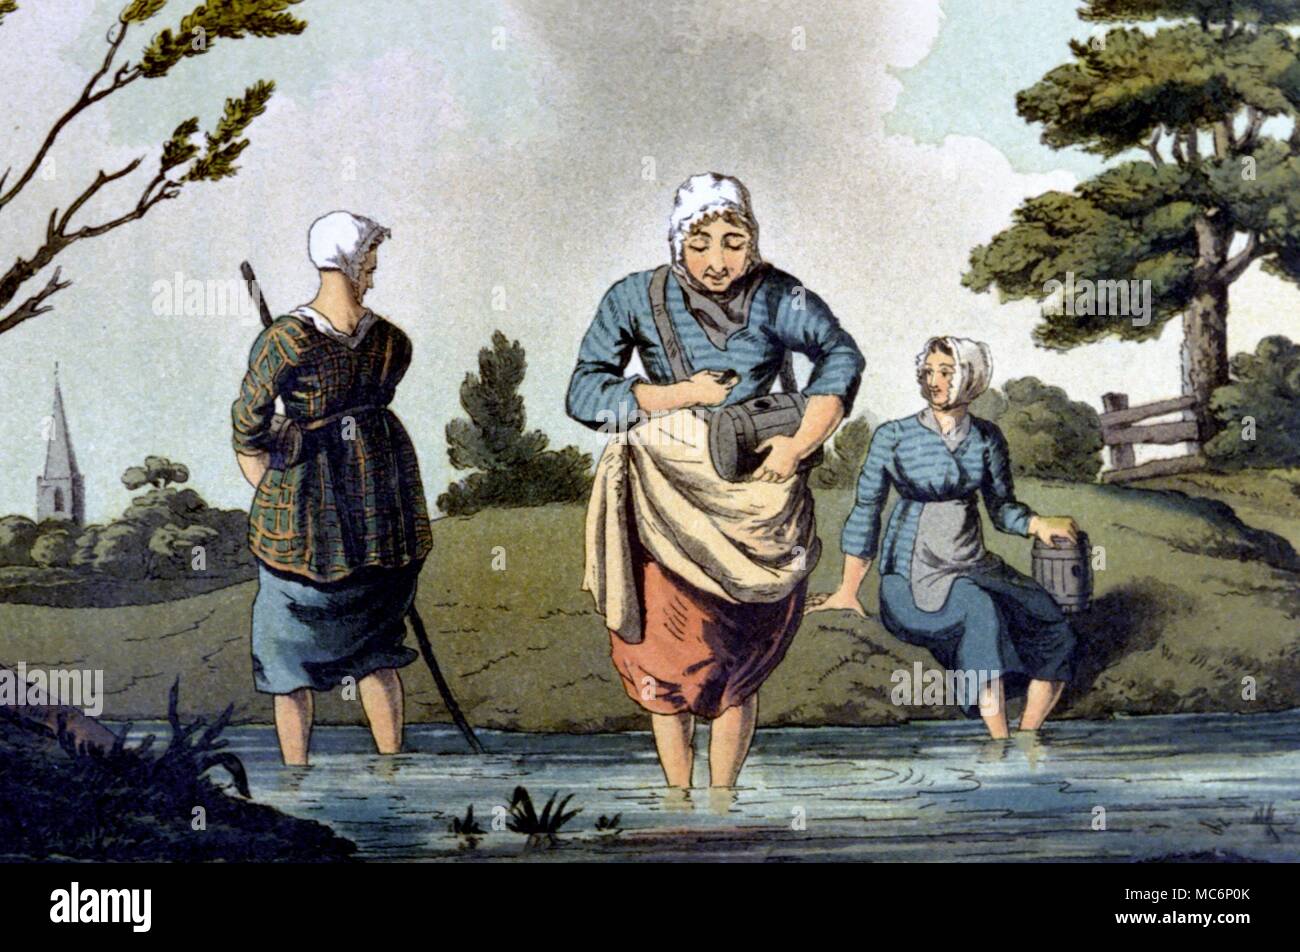 Medical Leech Gatherers Leach finders paddling in leech pools to allow the leeches to attach themselves to their legs Lithograph of 1885 from the Costume of Yorkshire by Geoffrey Walker Stock Photo